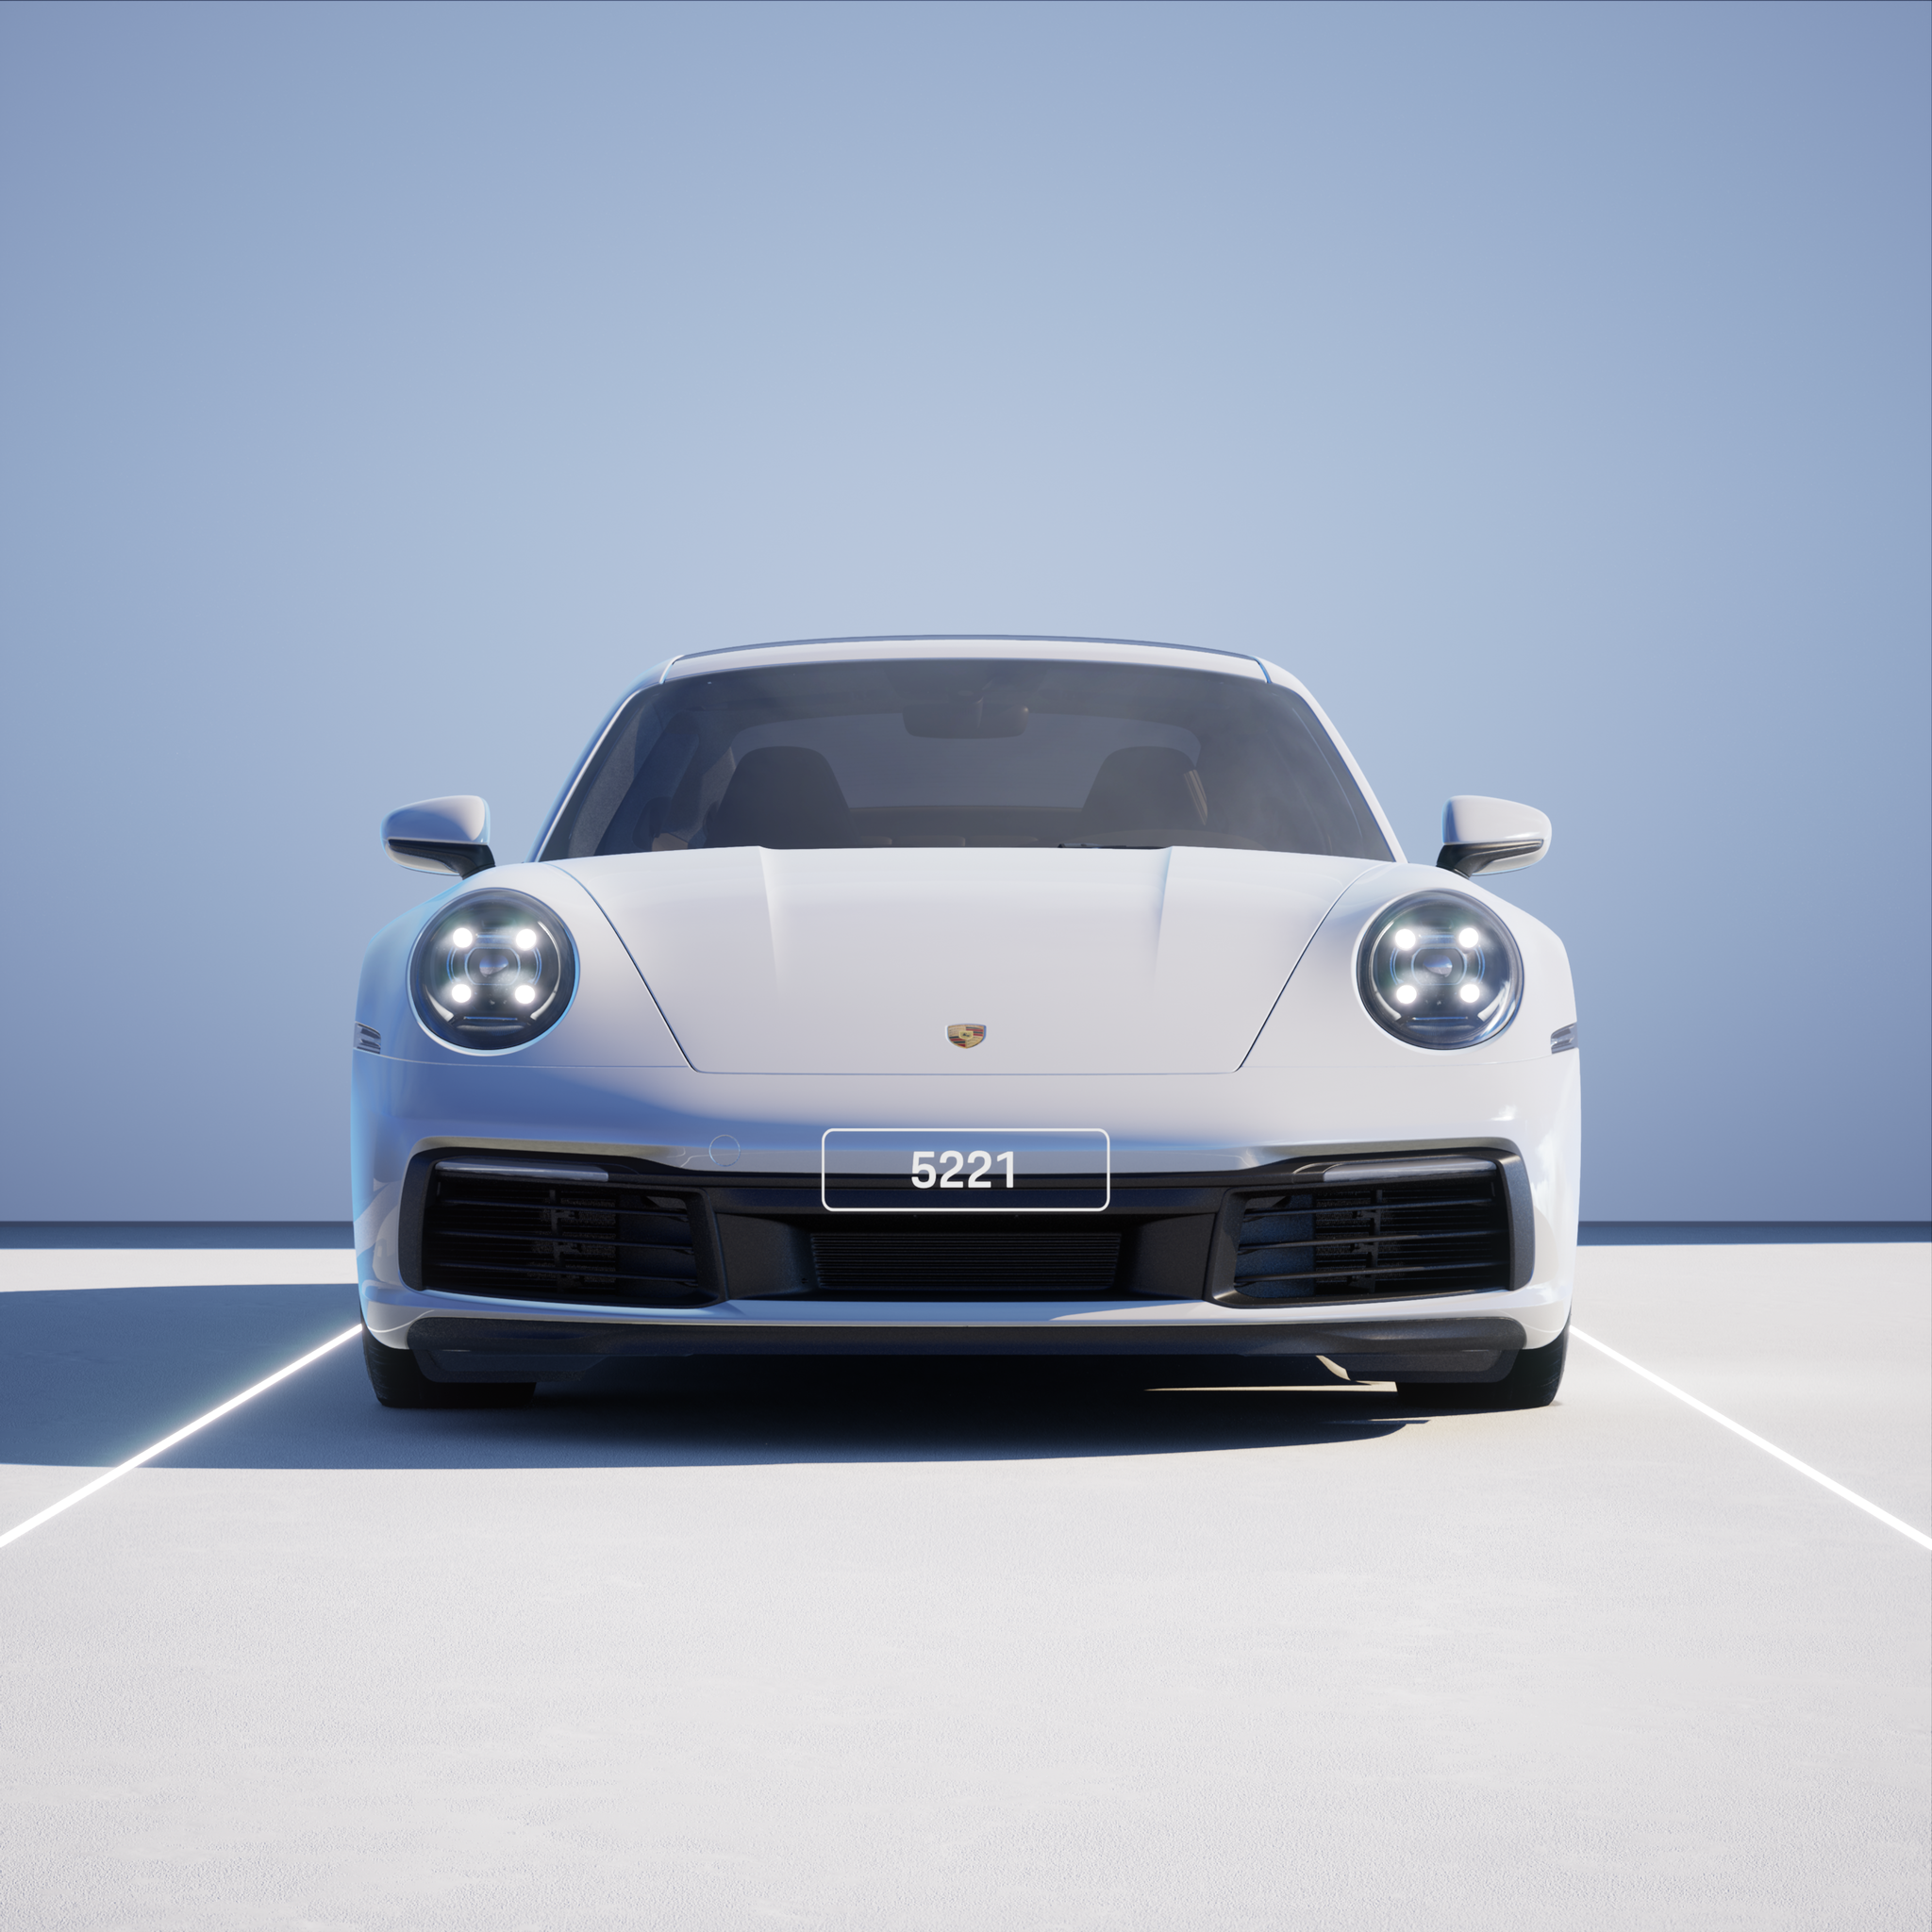 The PORSCHΞ 911 5221 image in phase